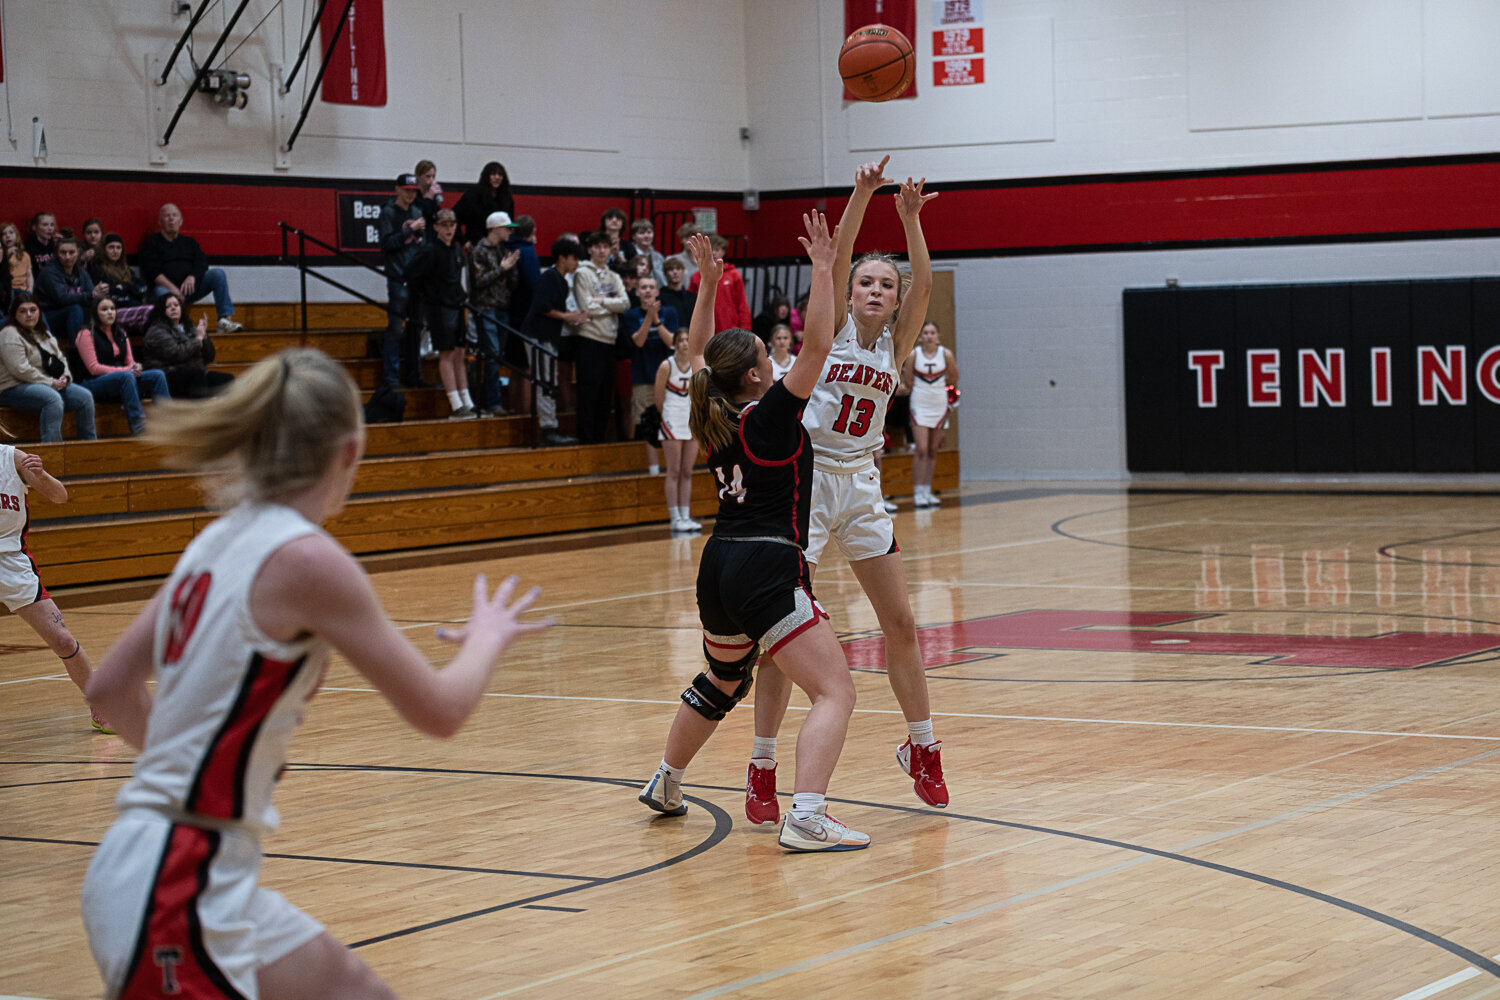 Presley Vanchieri passes to an open teammate during Tenino's loss to Toledo on Nov. 29.